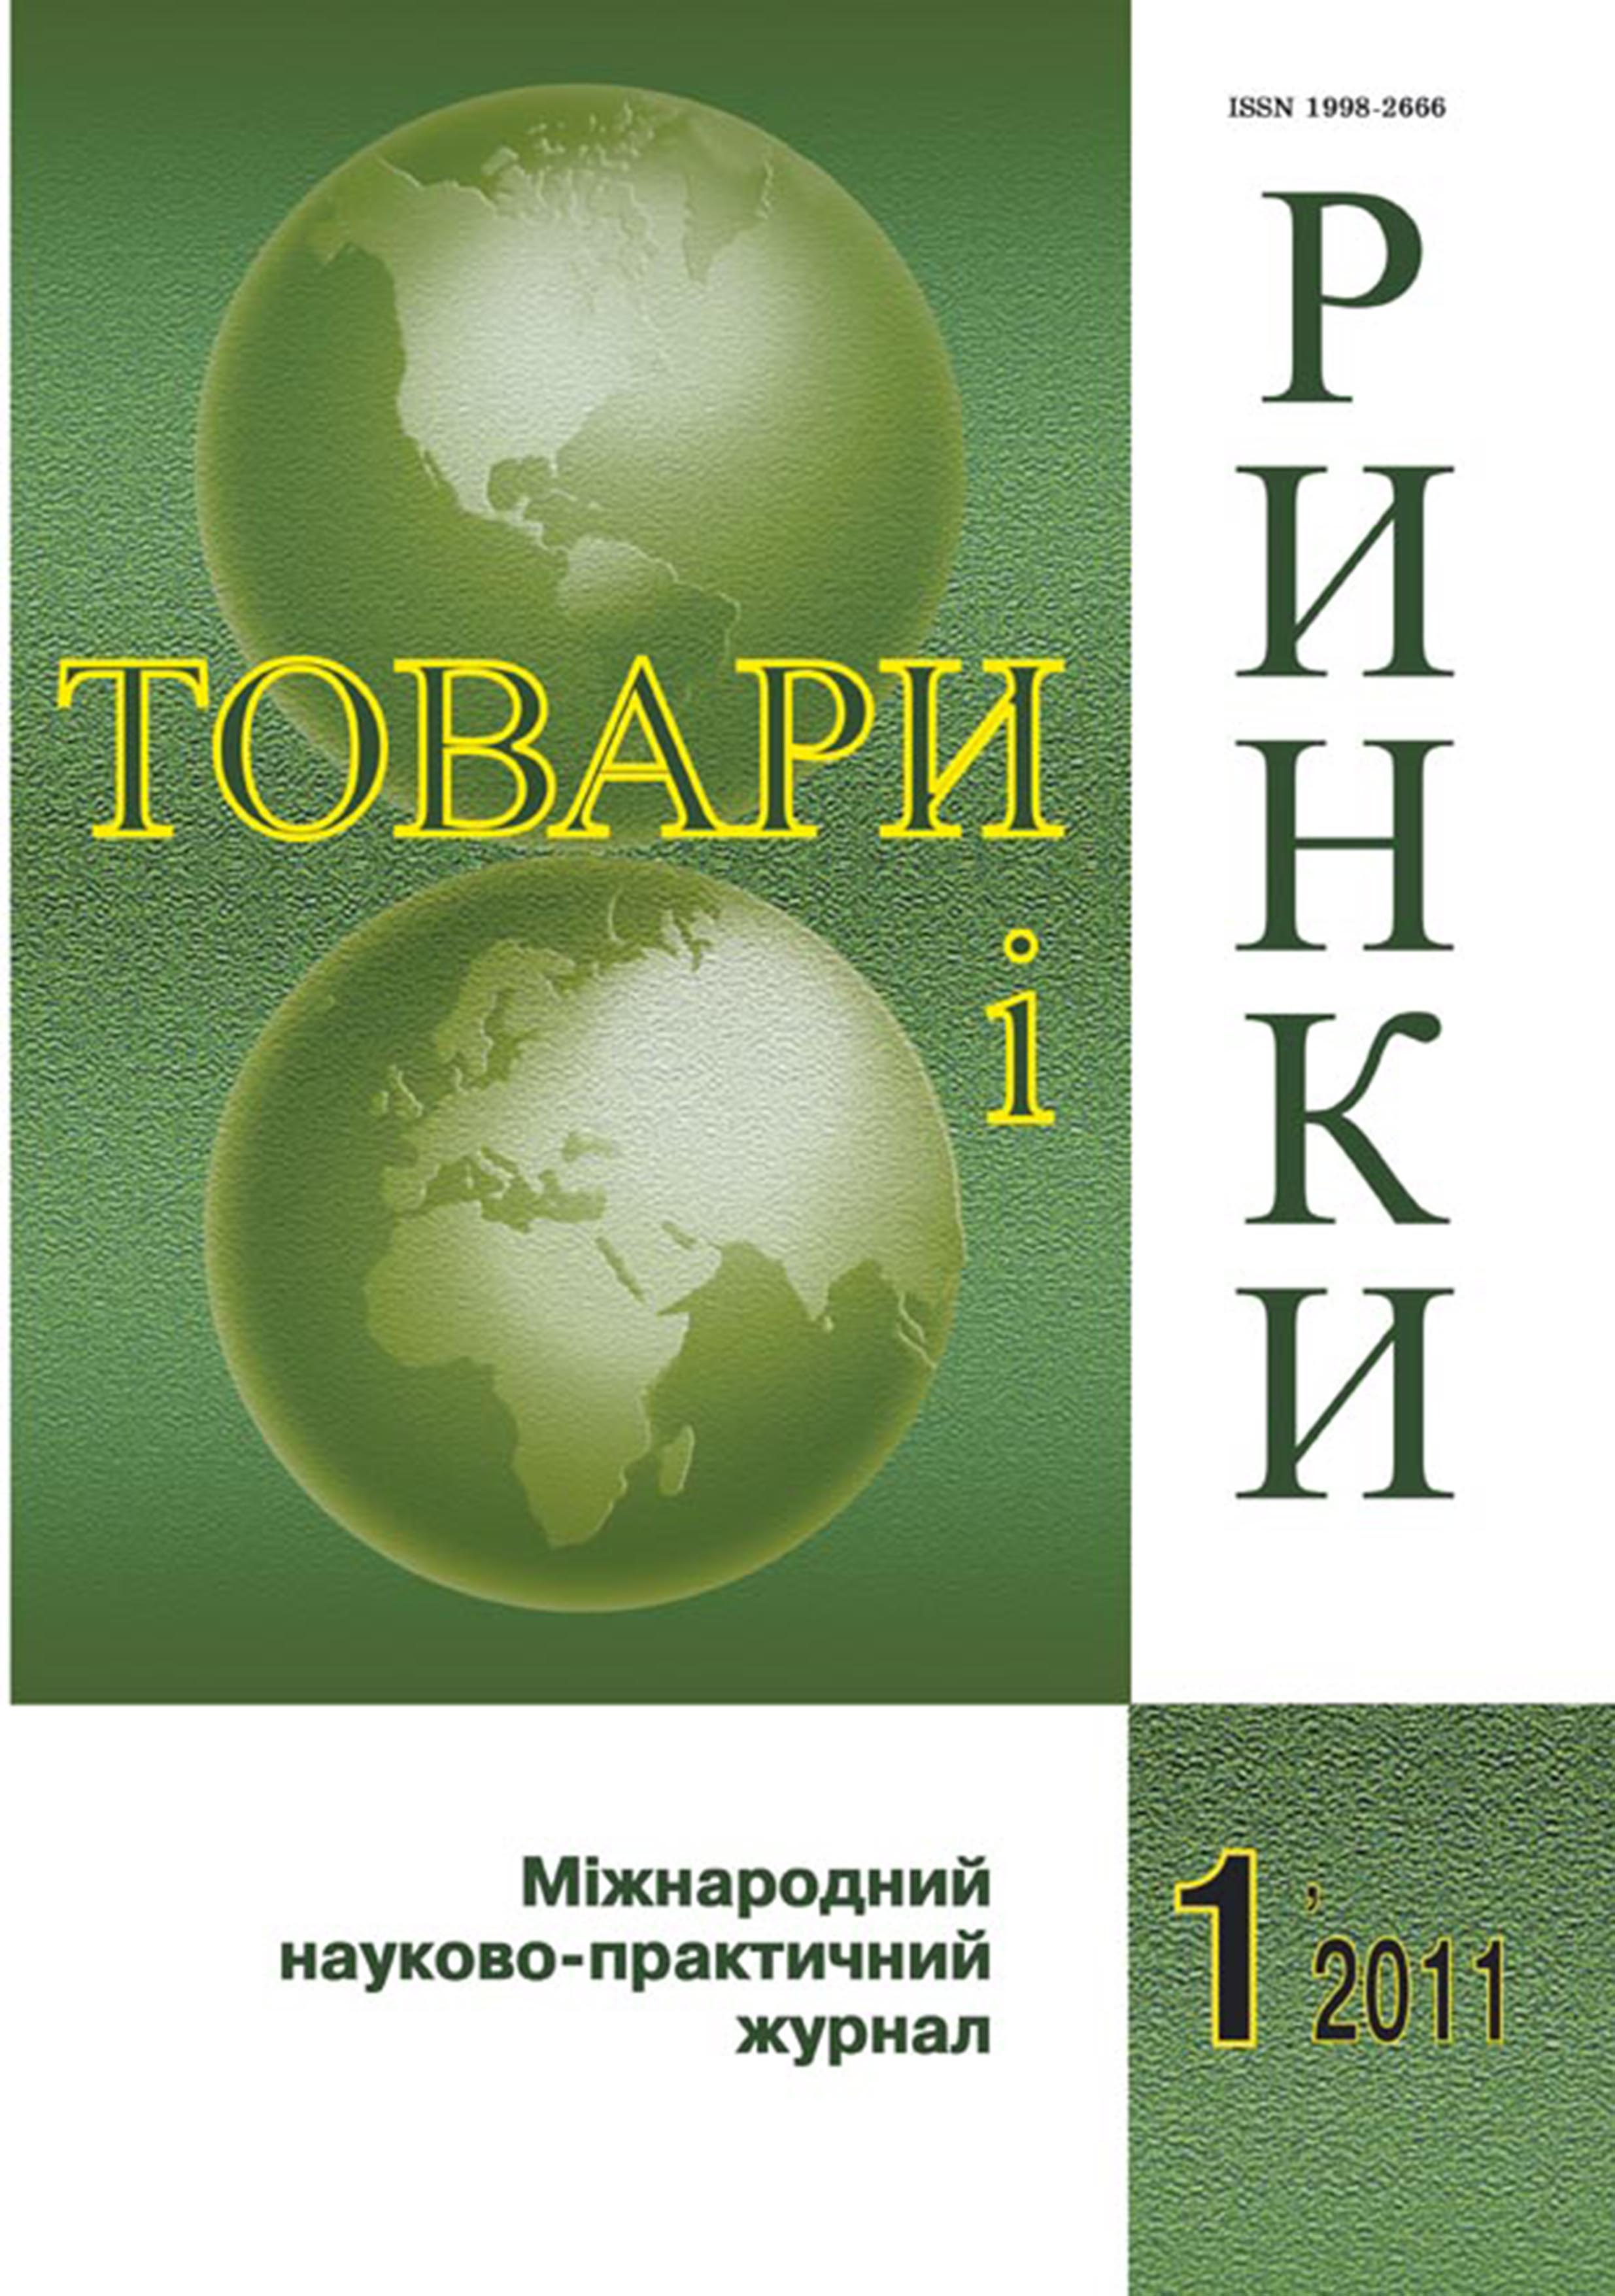 					View Vol. 11 No. 1 (2011): Technical and Economic Science
				